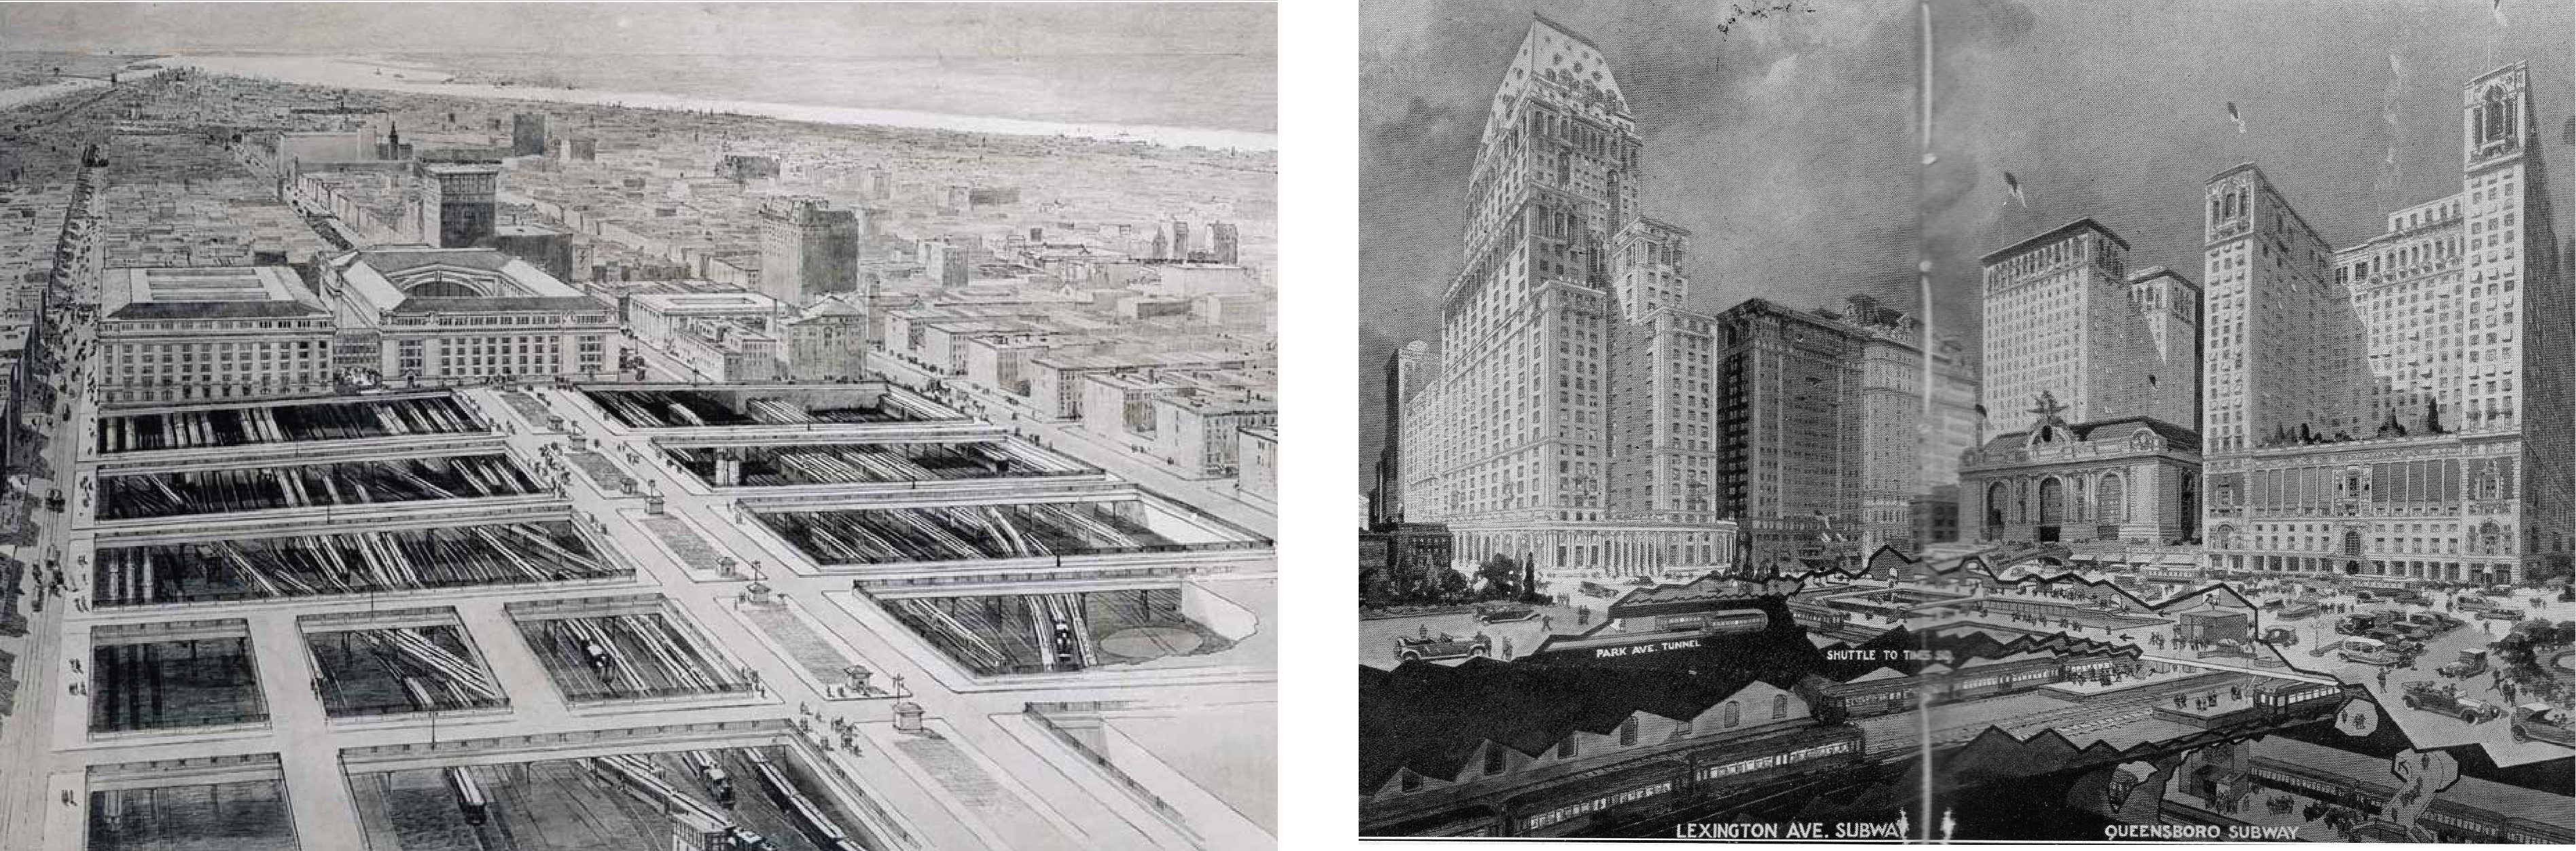 Two photos of early-1900s sketches showing the tracks beneath the lots around Grand Central (left) and a perspective section of developments around Grand Central, with a cut showing the train lines below (right)